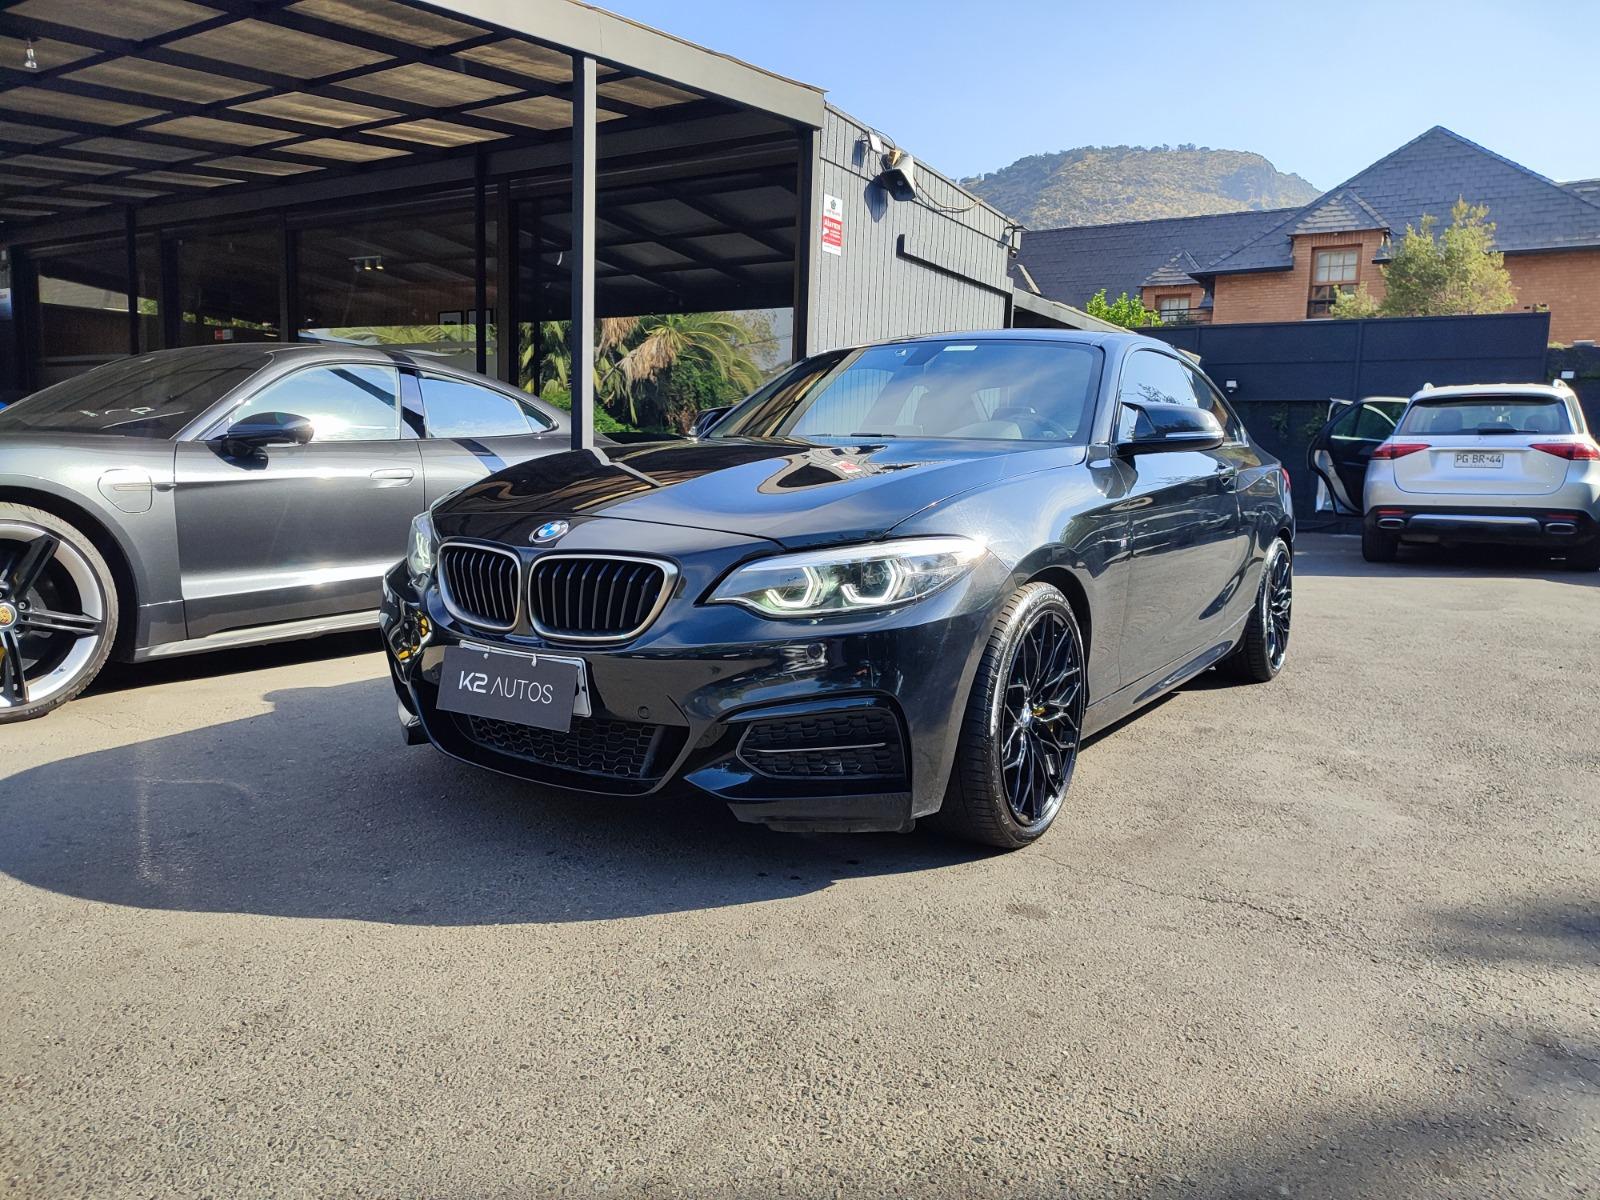 BMW M240I 3.0 COUPE 2021 MUCHOS EXTRAS, 340 HP - FULL MOTOR